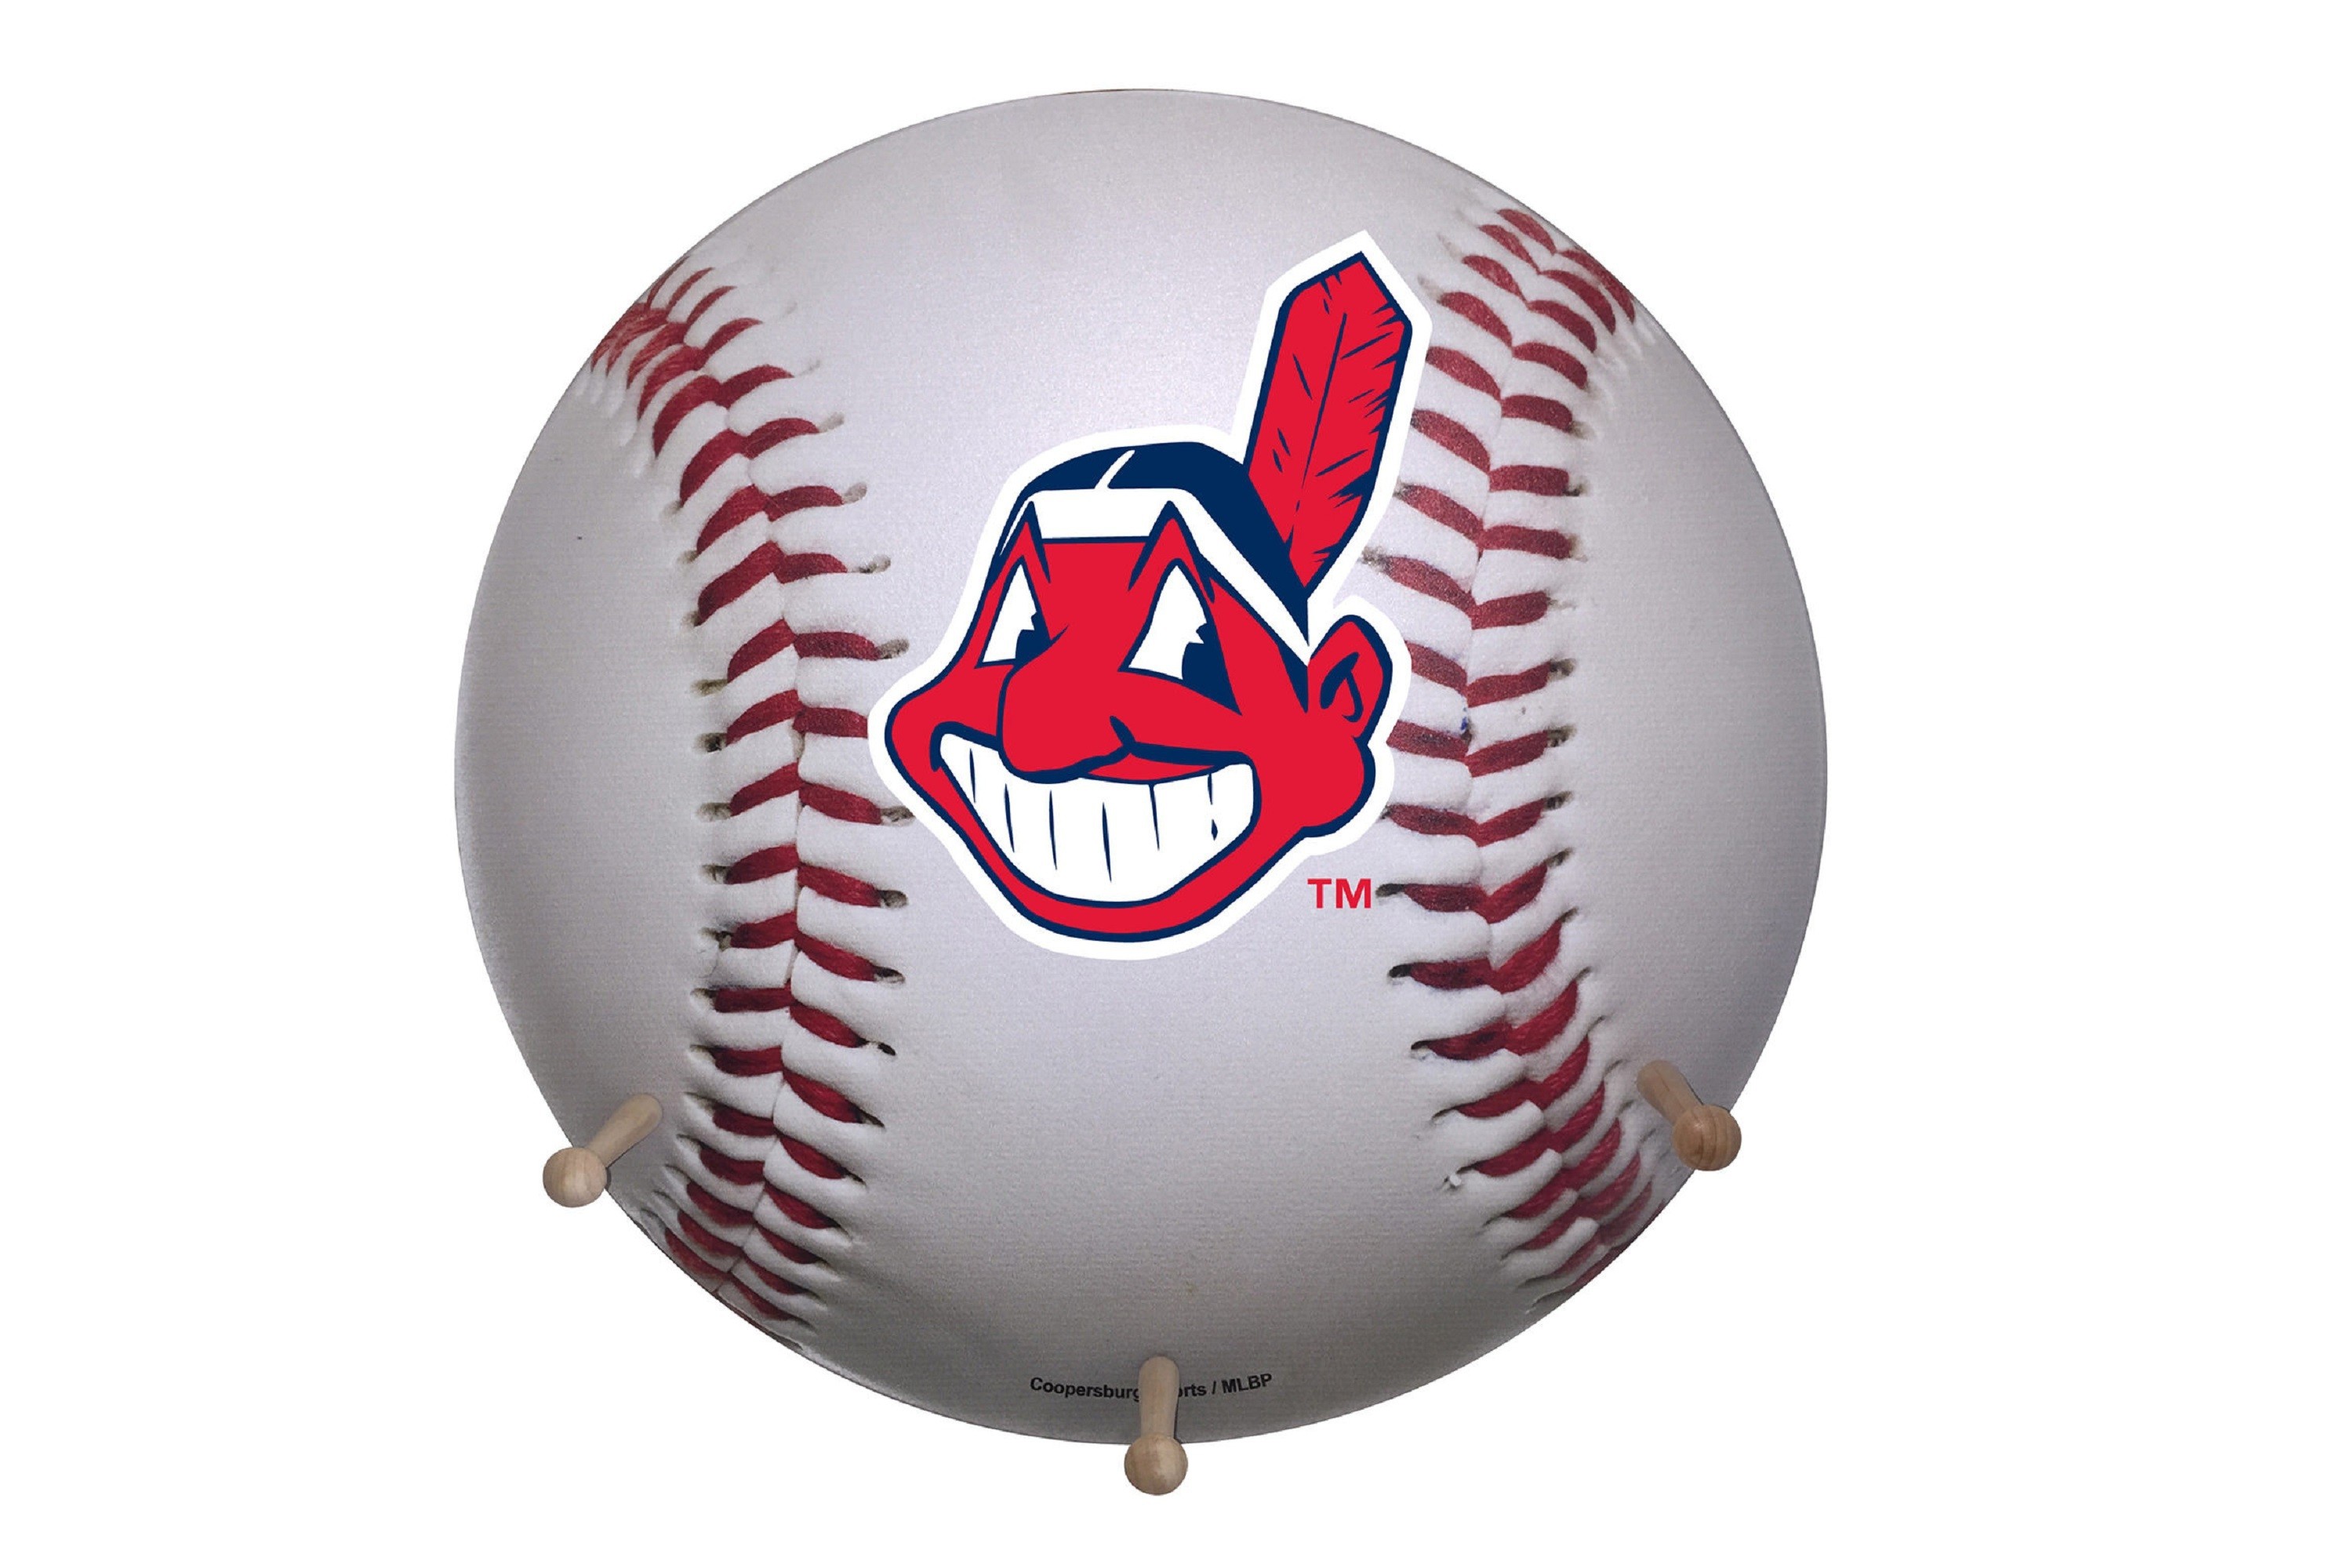 Cleveland Indians wallpaper ·① Download free beautiful ...